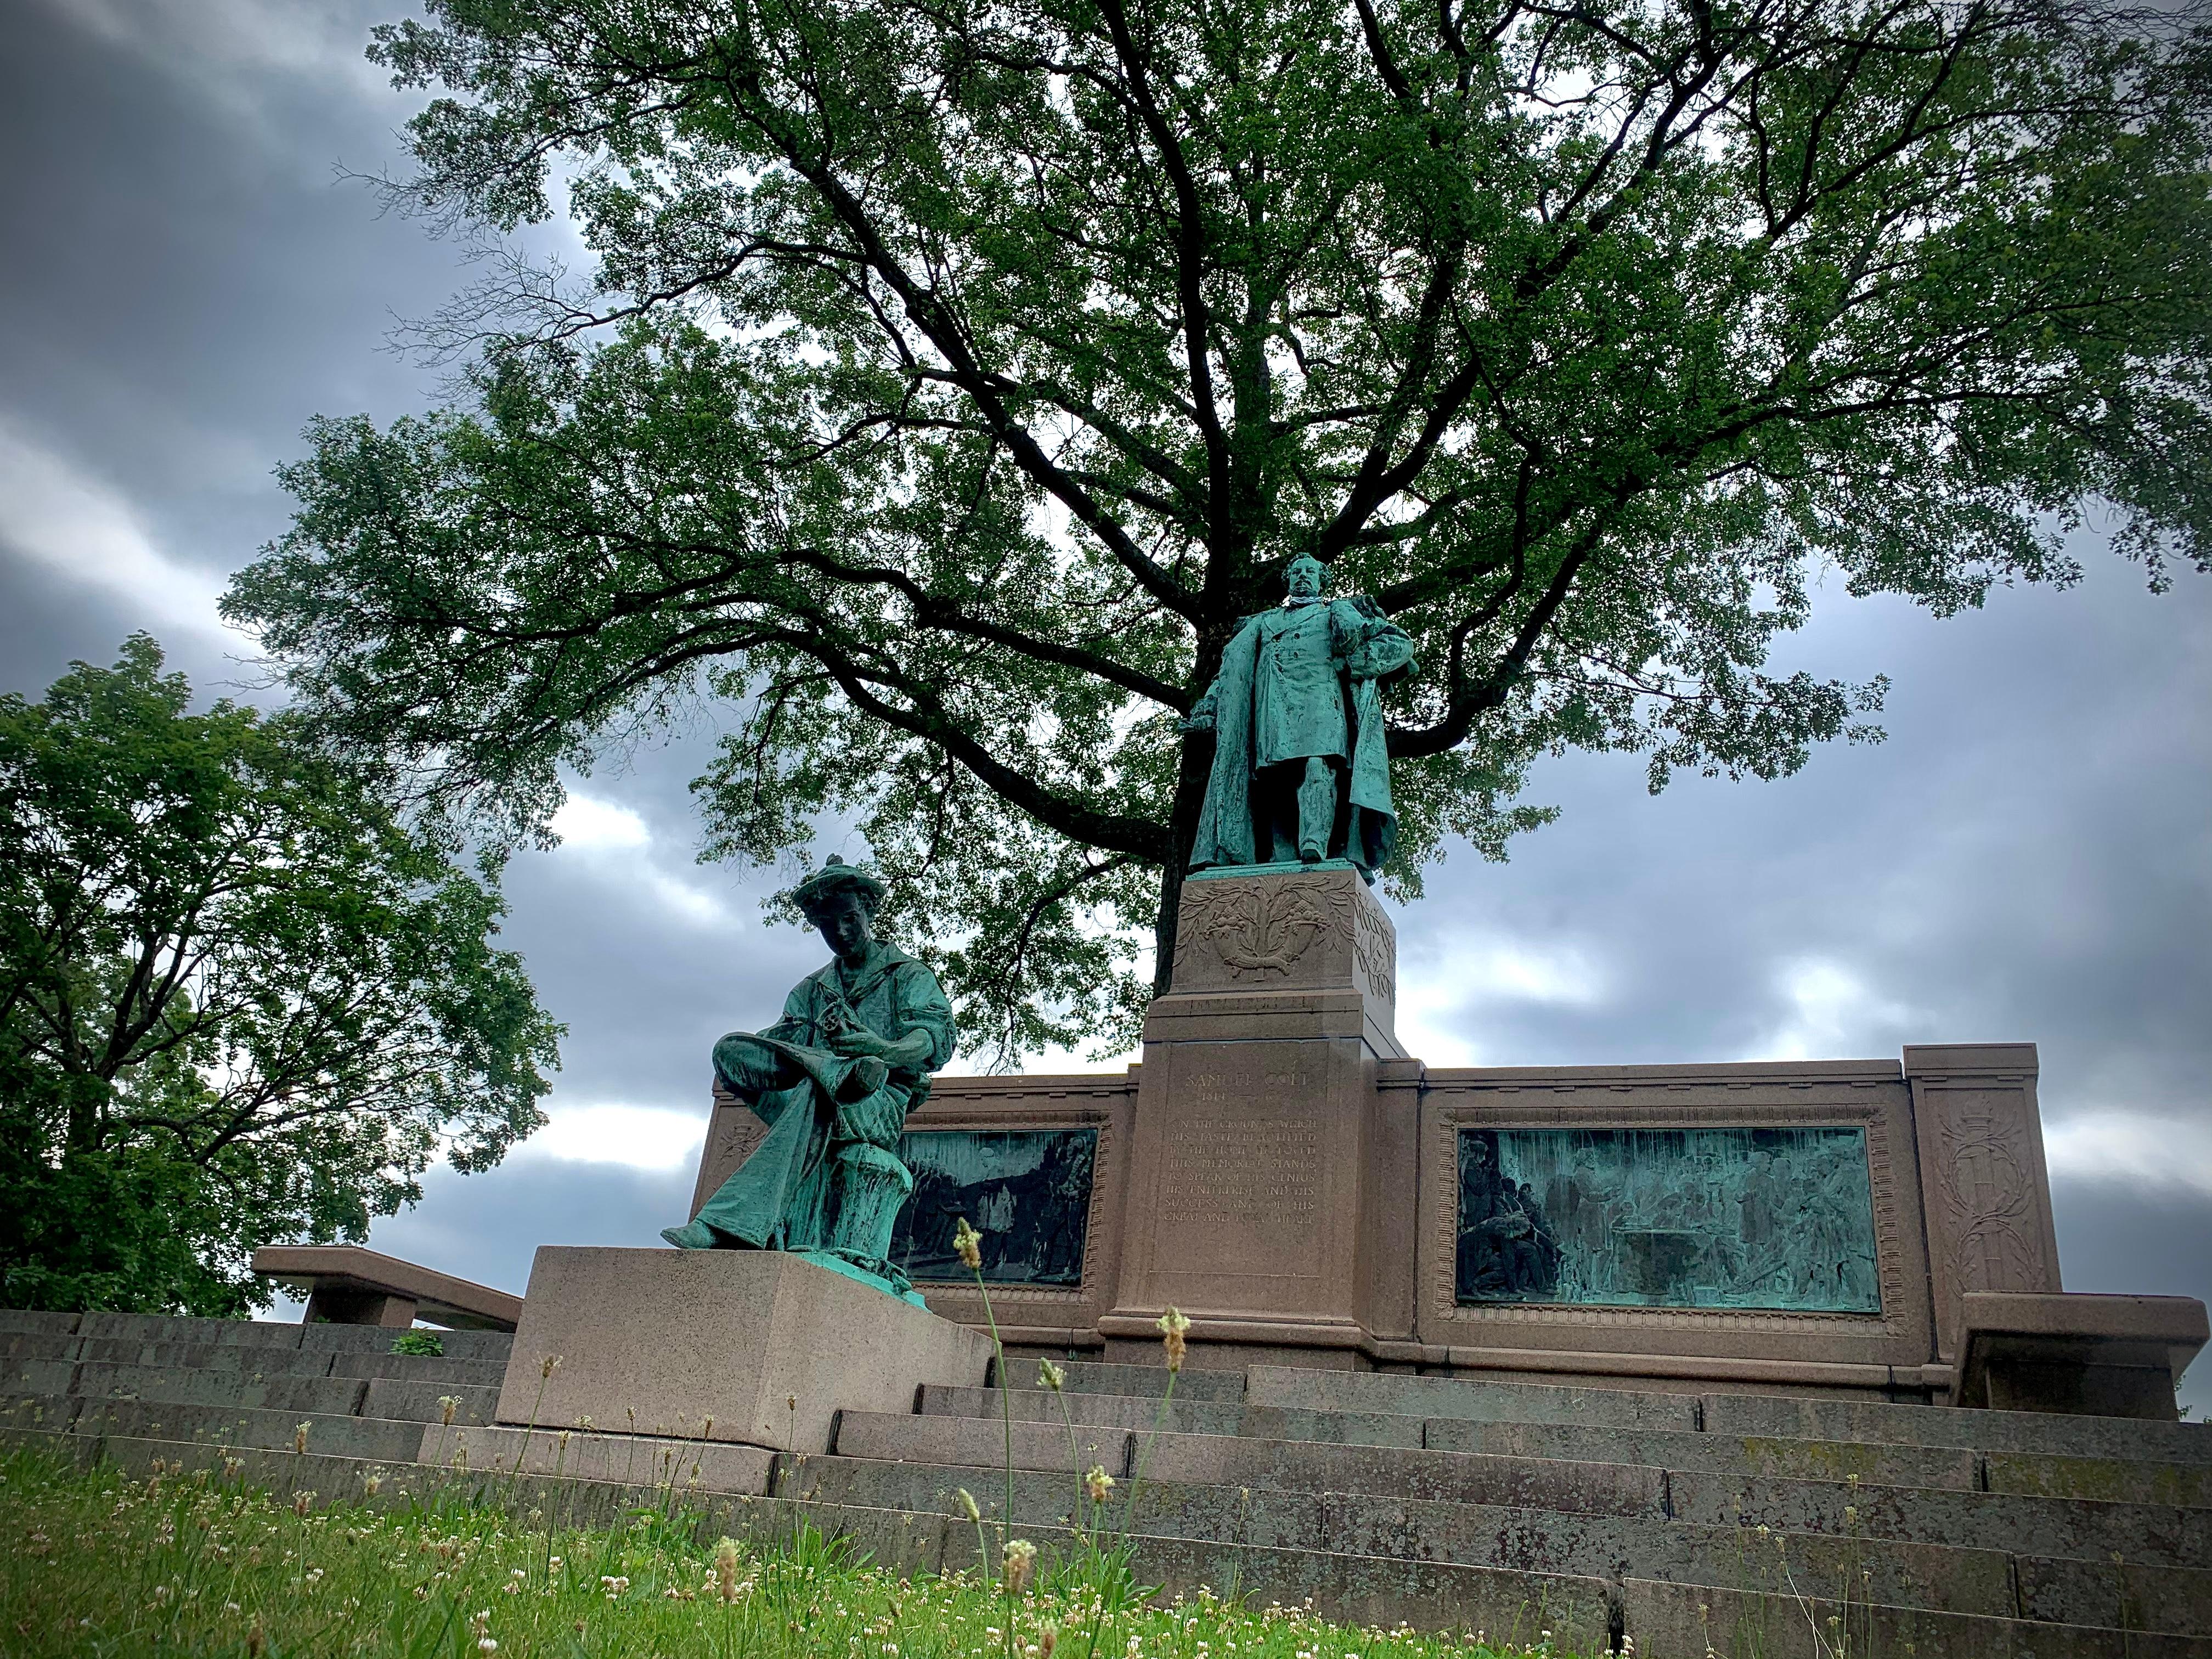 A statue of a young and an adult Samuel Colt in front of a tree with a cloudy sky.